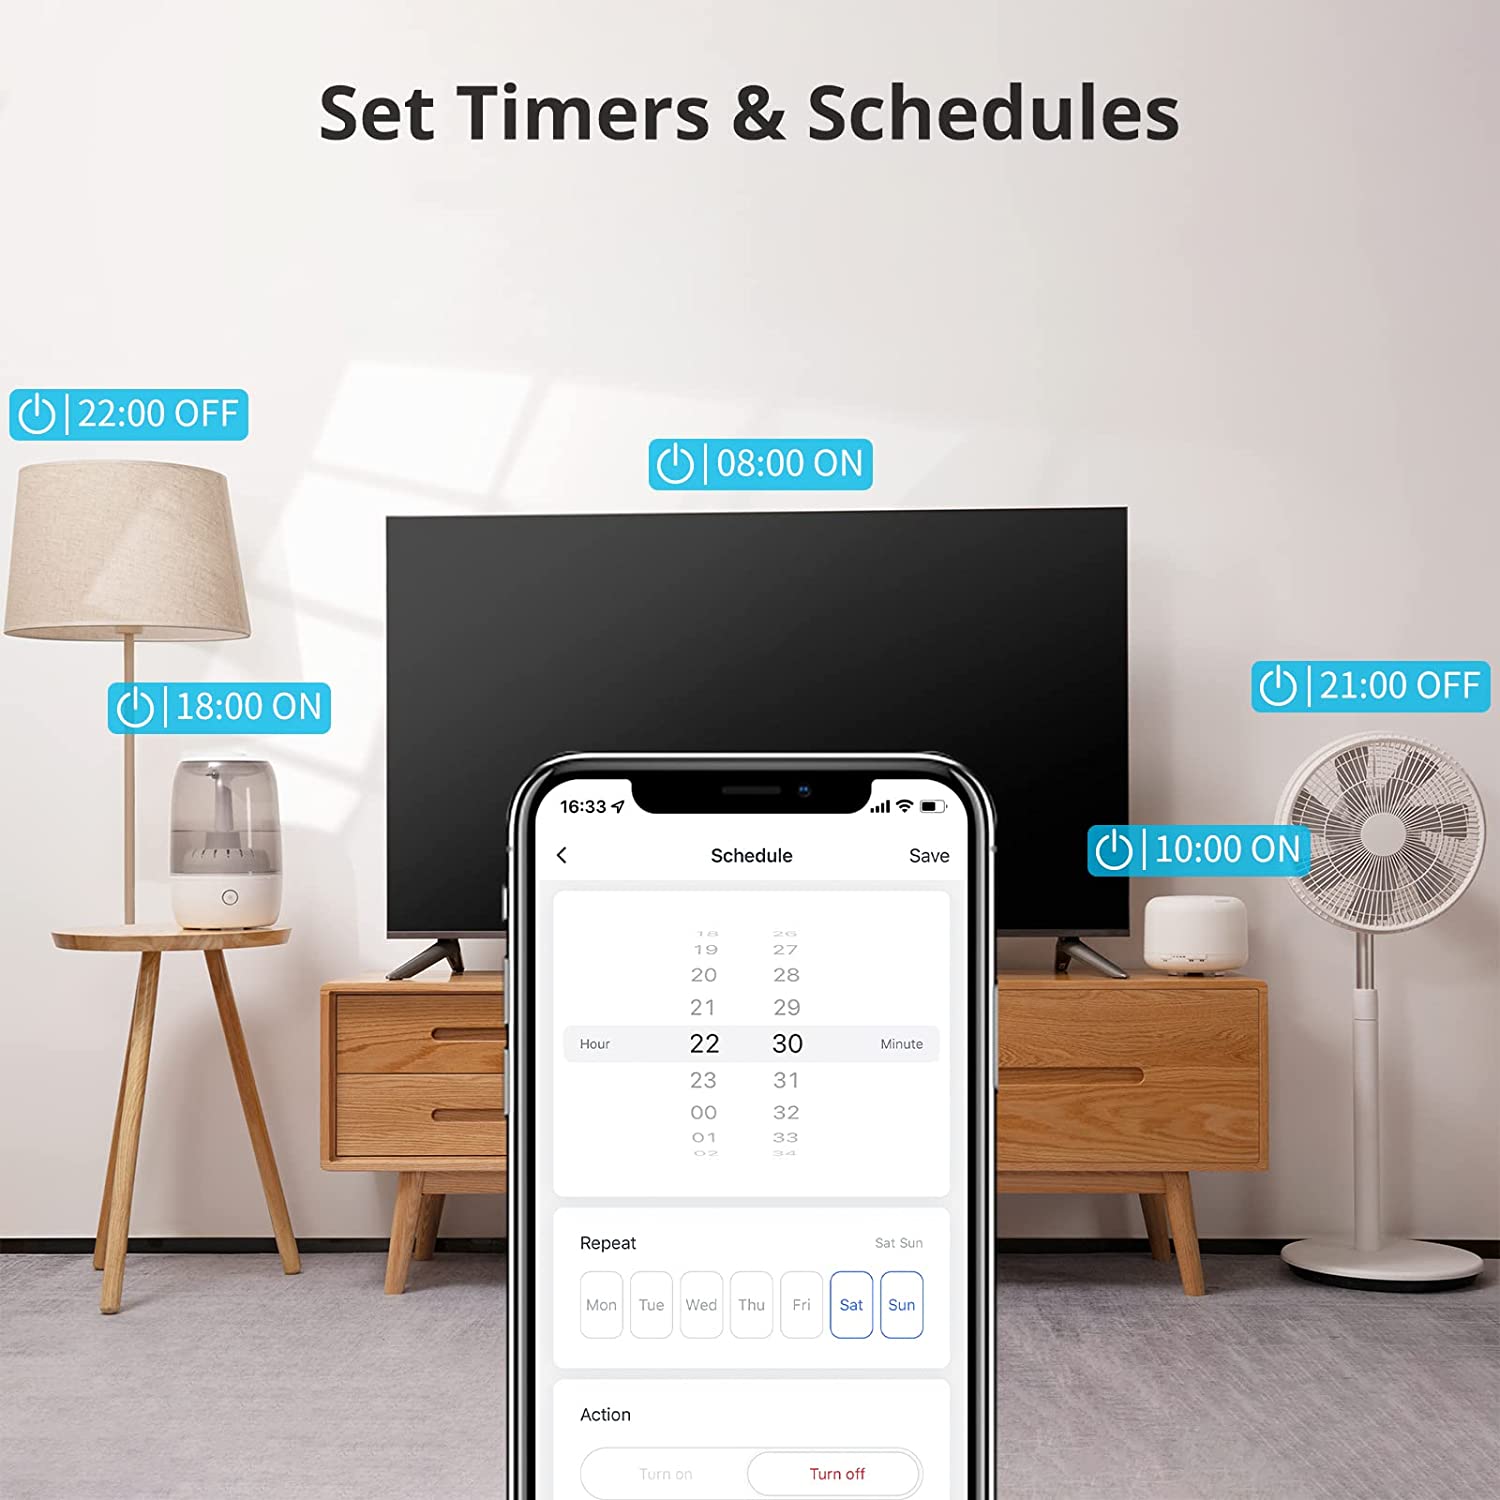 SwitchBot Plug Mini | Smart Home WiFi (2.4GHz Only) & Bluetooth, Works with Apple HomeKit, Alexa, Google Home, App Remote Control & Timer Function